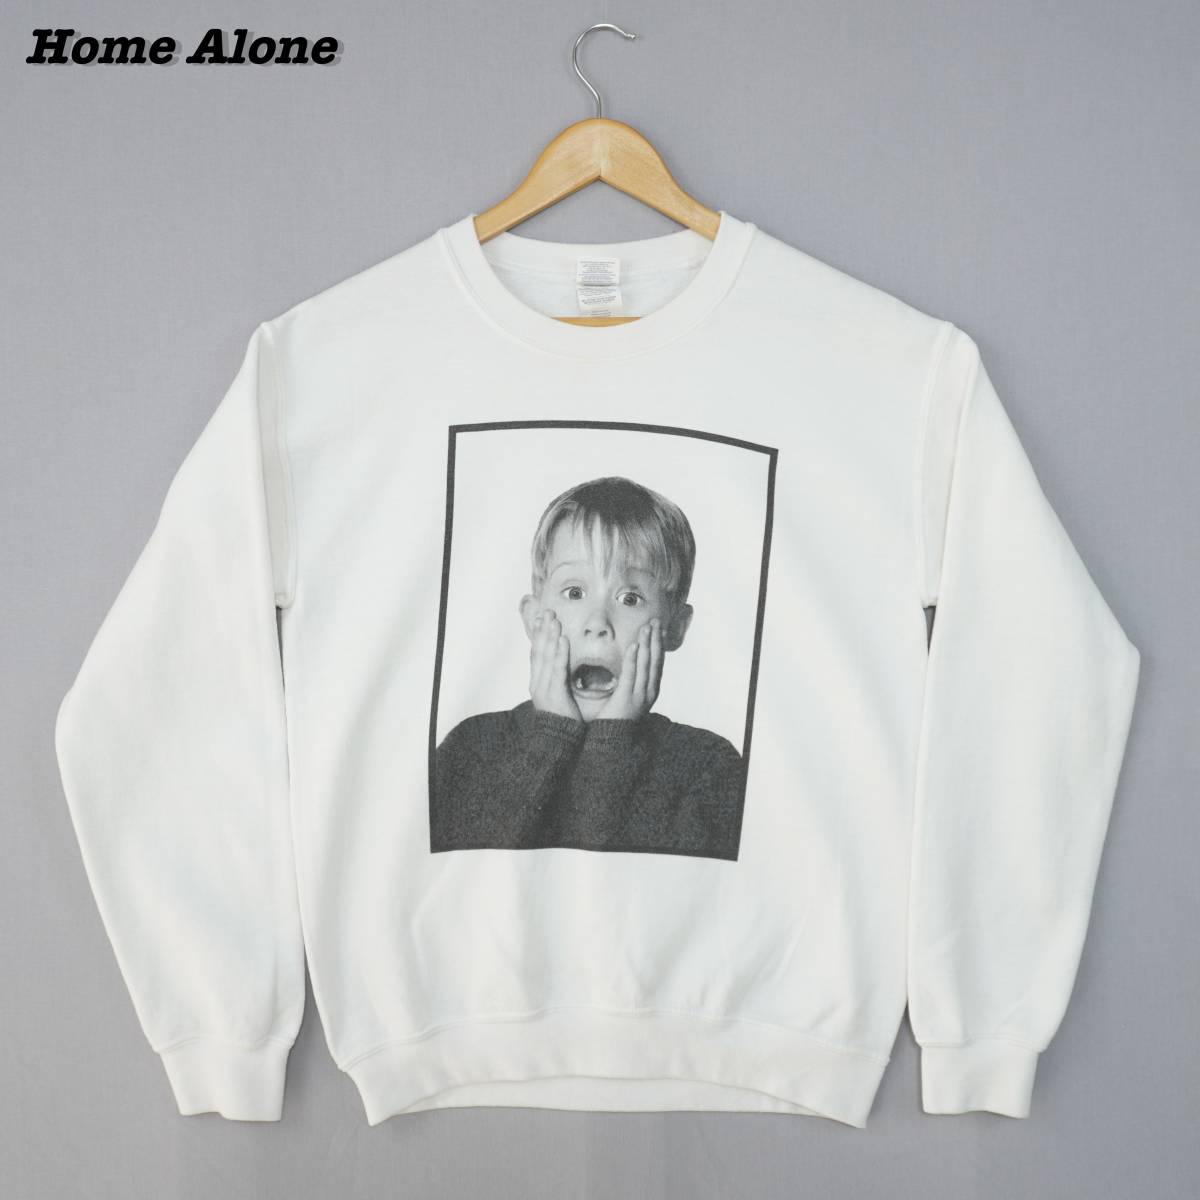 Home Alone Sweatshirts 2000s S SWT2330 ホームアローン ムービー スウェット